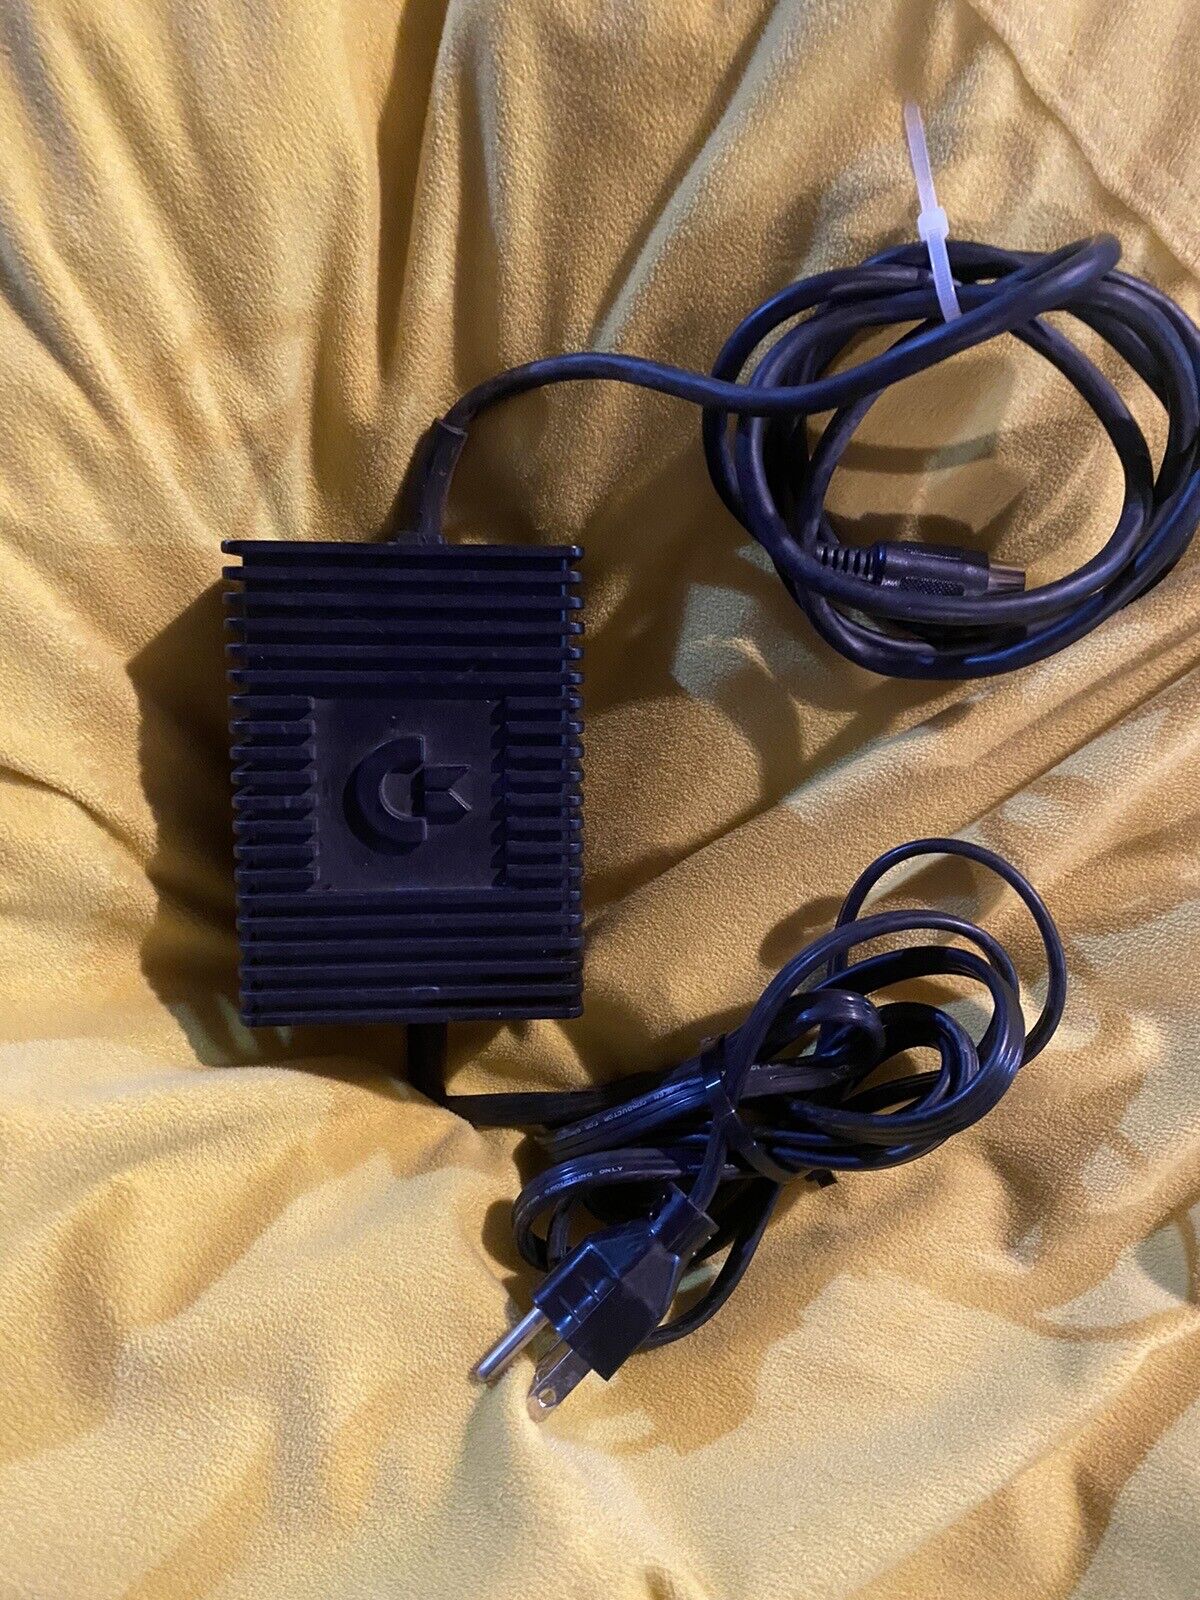 Commodore Computer 64 c64 OEM Power Supply Brick Adapter US Connector Working